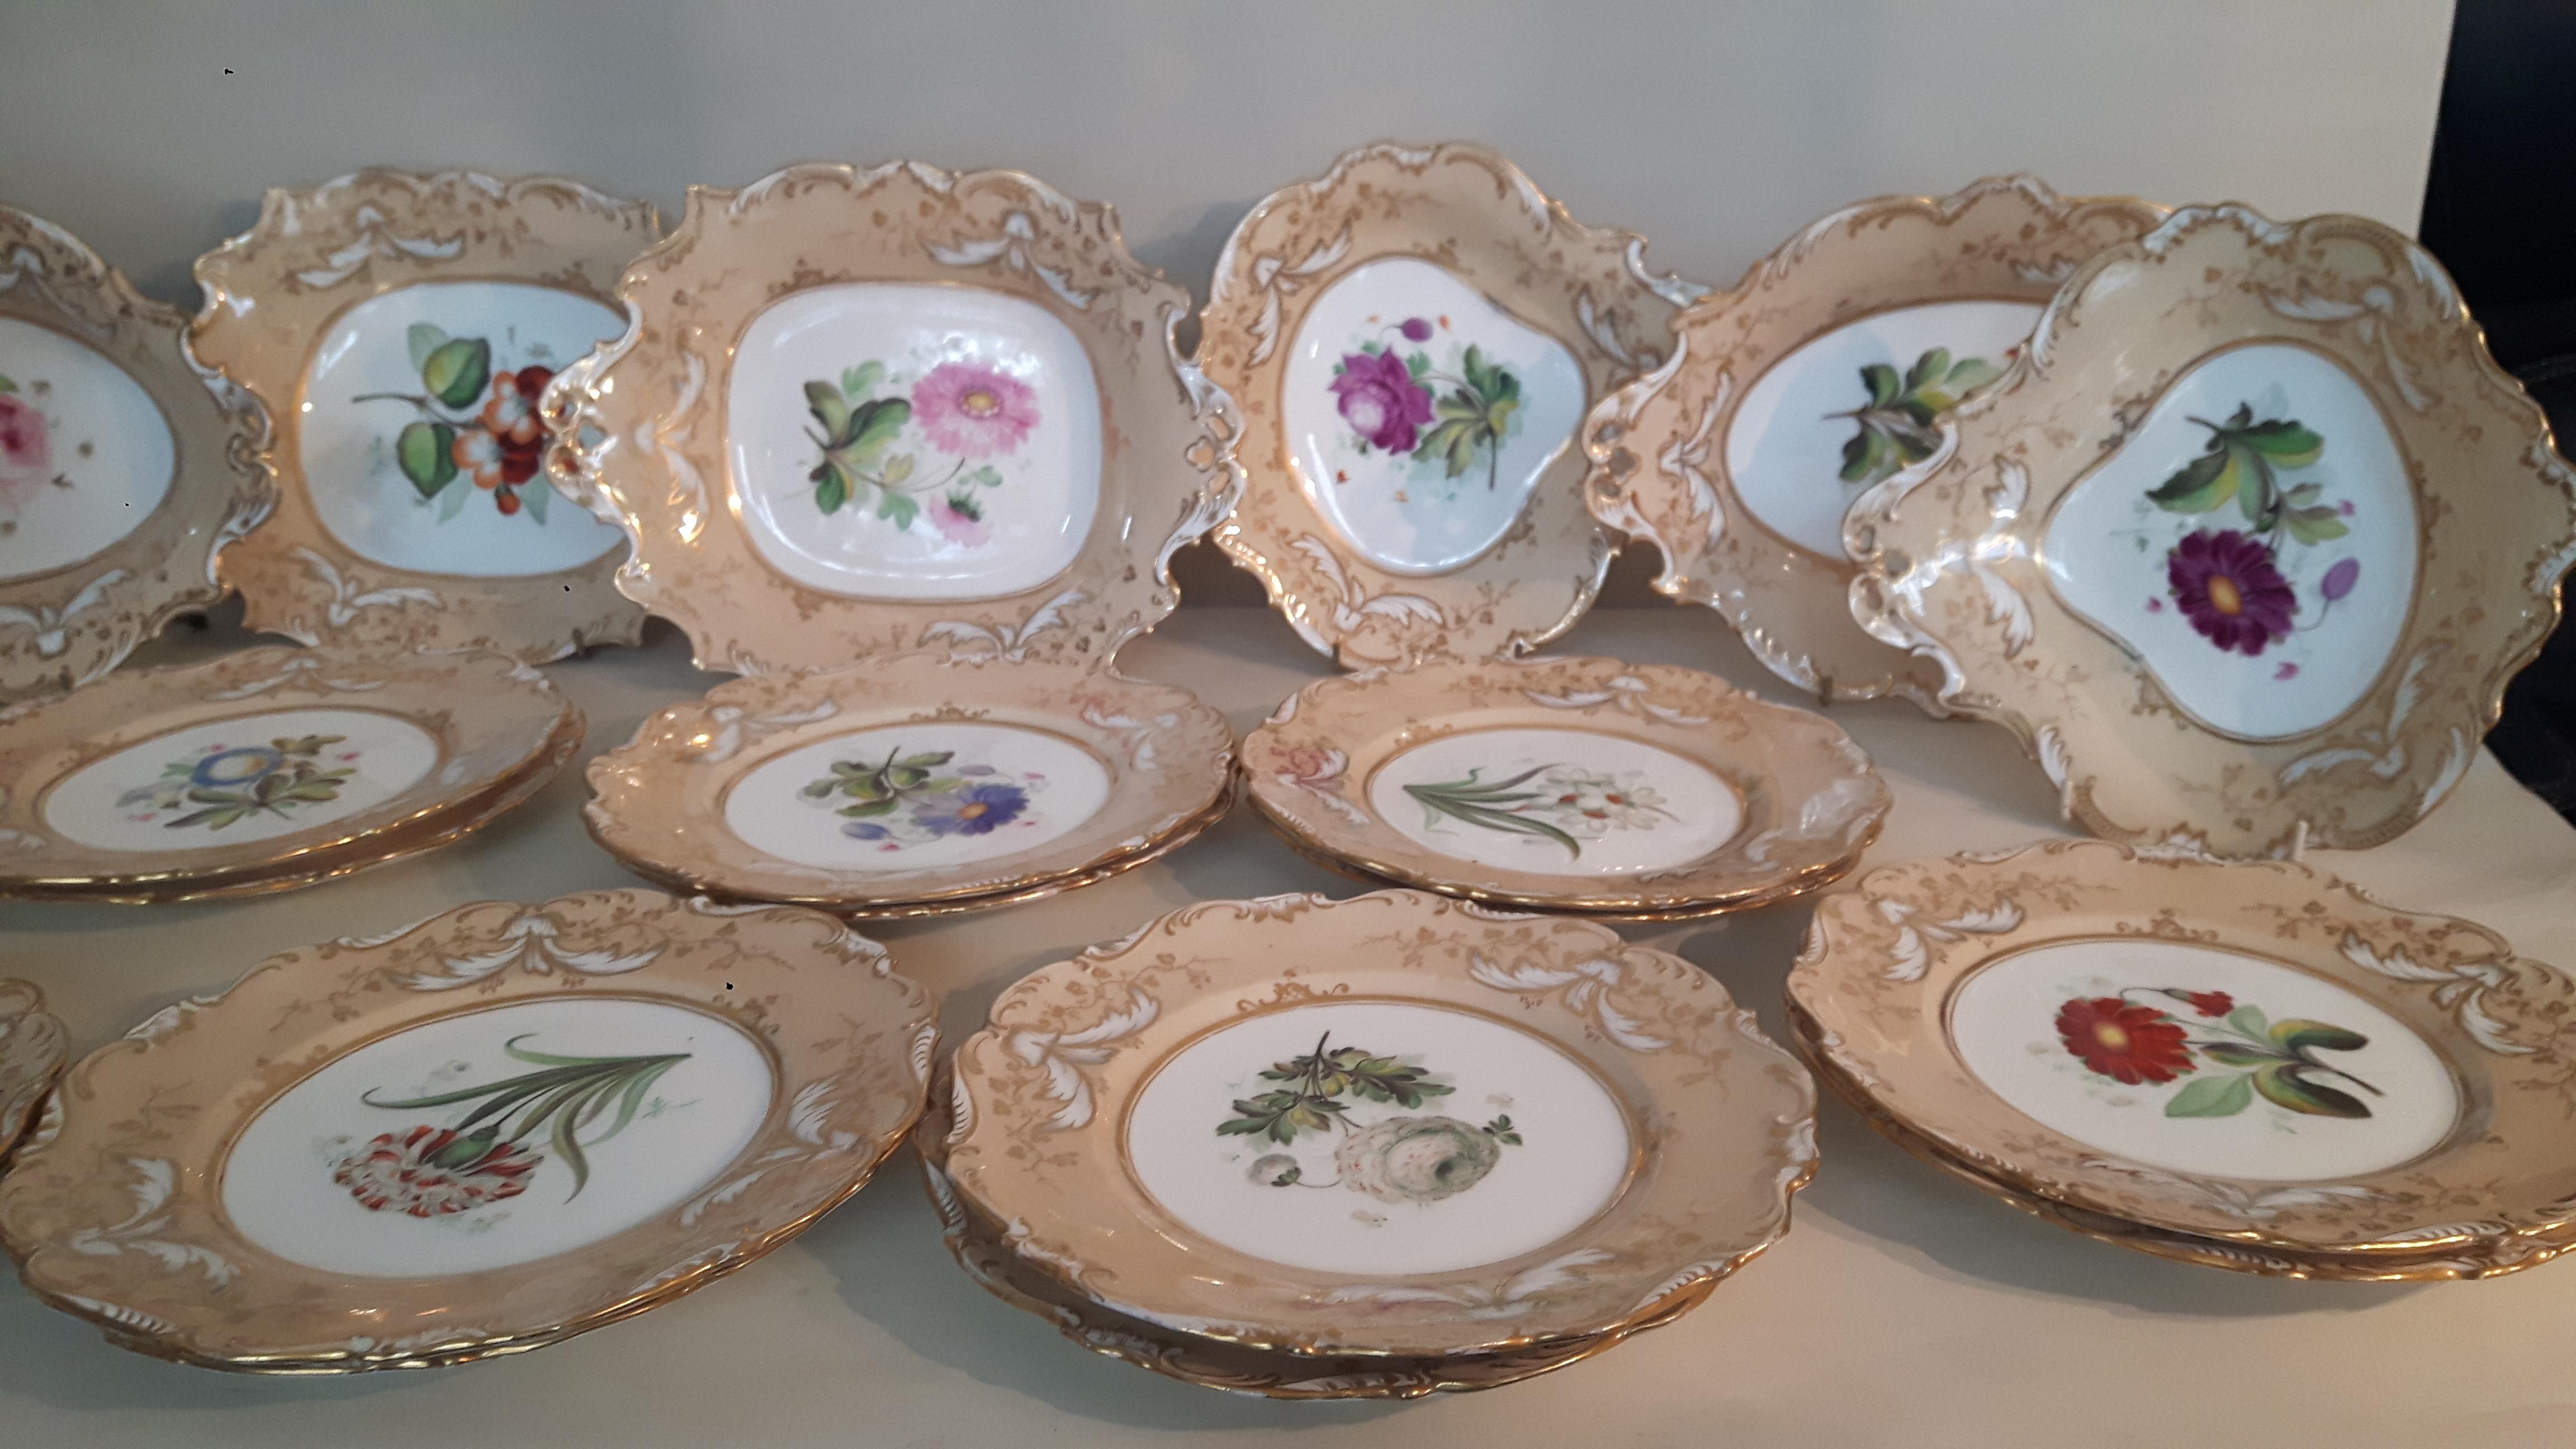 A large William Ridgway dessert service each plate hand painted with a different botanical pattern, the borders painted
in pale peach with gilded patterns of leaves and white swags
The service comprises of 14 round plates 23 cm diameter
2 oval